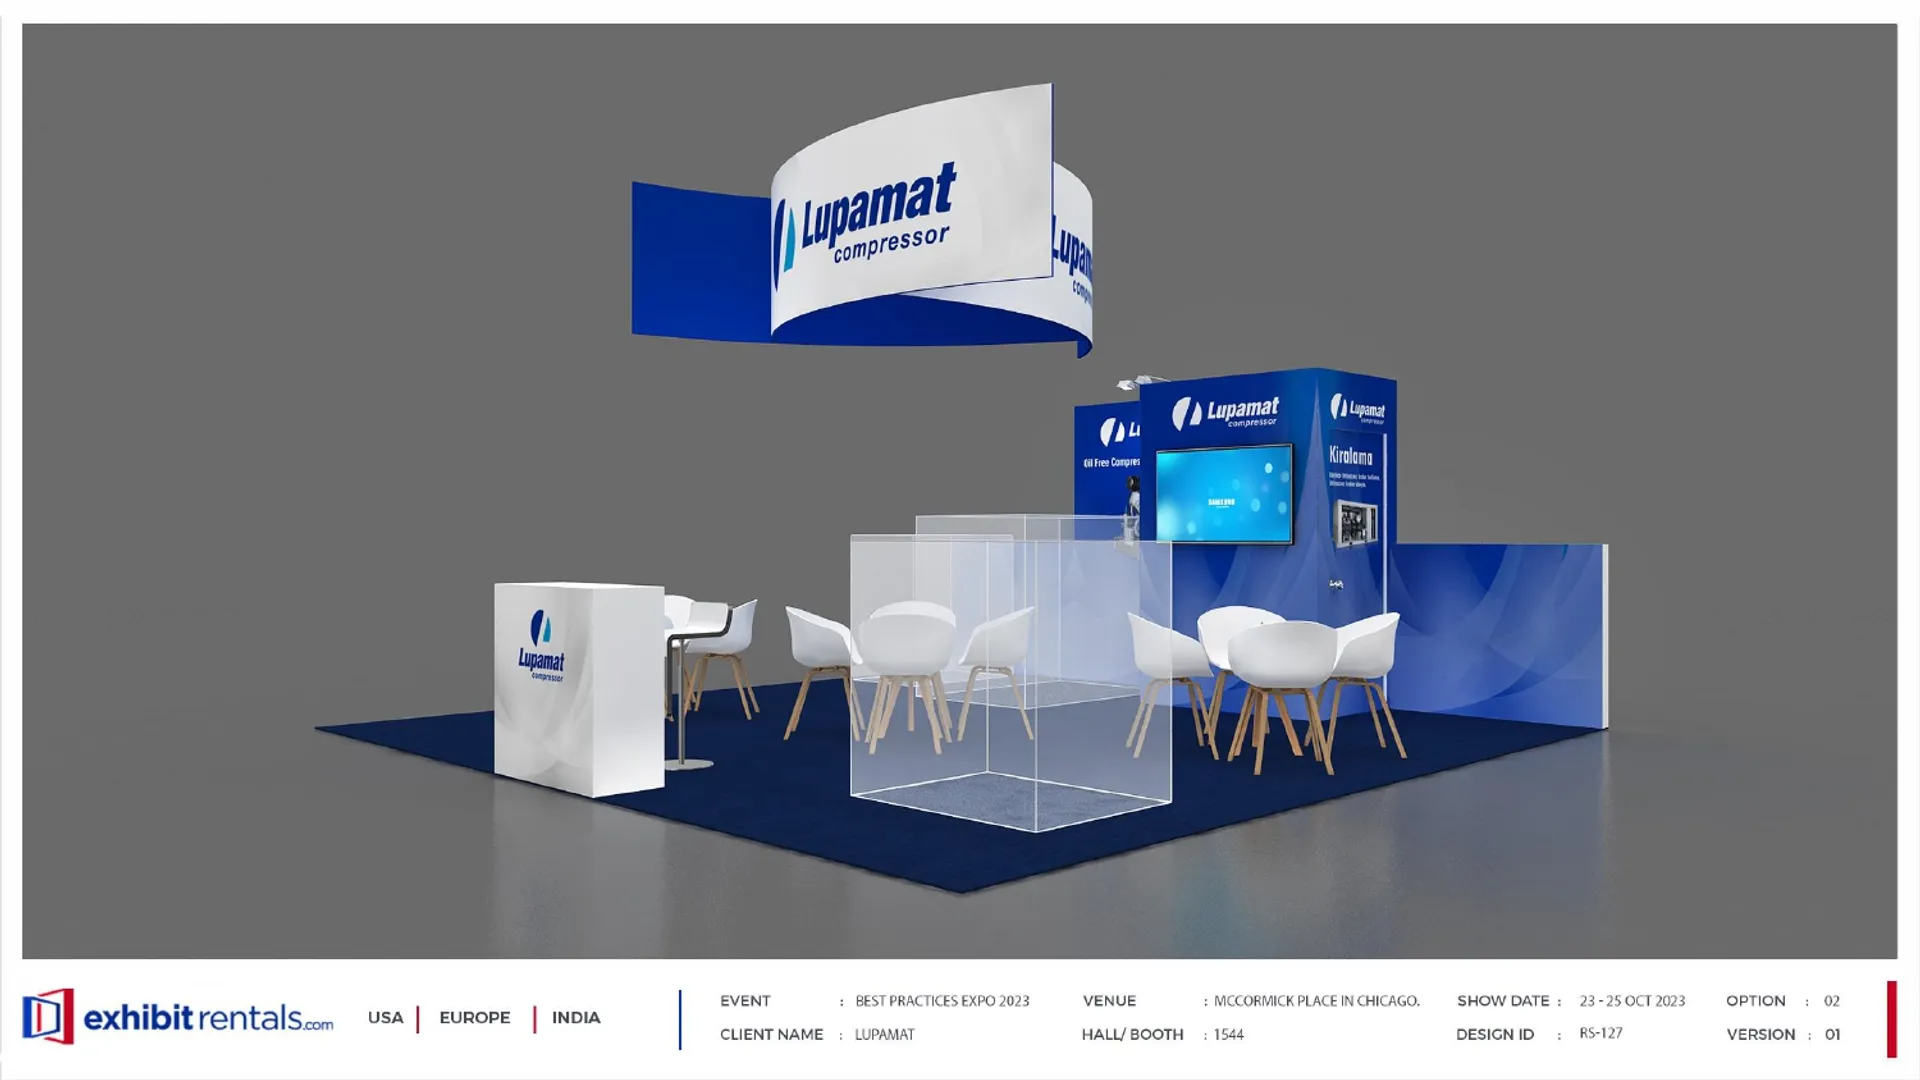 booth-design-projects/Exhibit-Rentals/2024-04-18-40x40-PENINSULA-Project-99/2.1_Lupamat_Best practices expo_ER design proposal-12_page-0001-f1l2vg.jpg